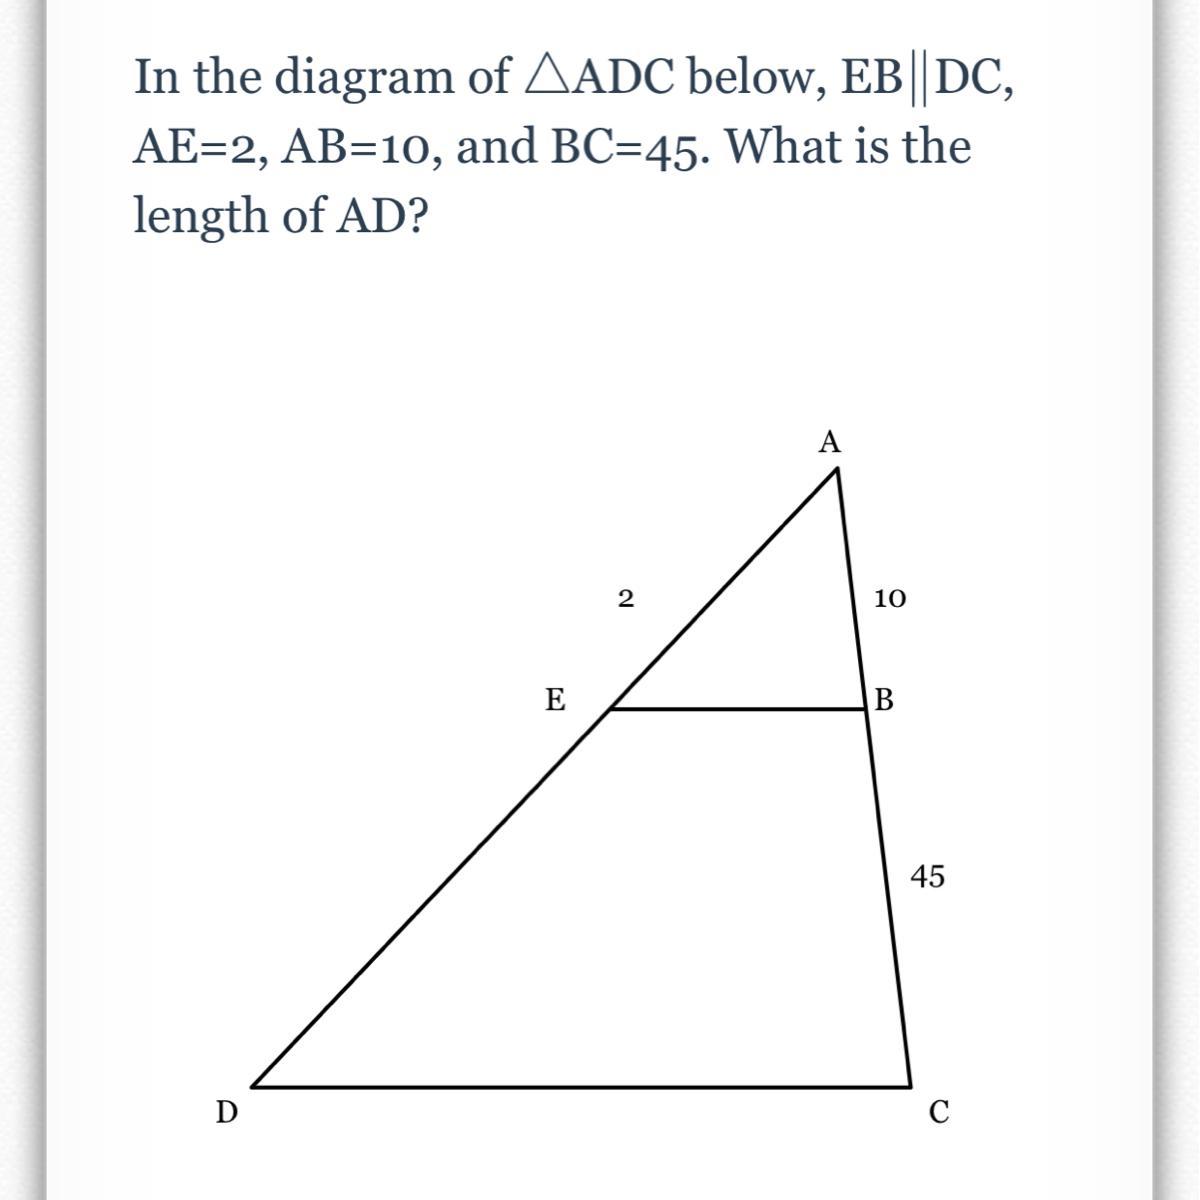 In The Diagram Of ADC Below, EBDC, AE=2, AB=10, And BC=45. What Is The Length Of AD?